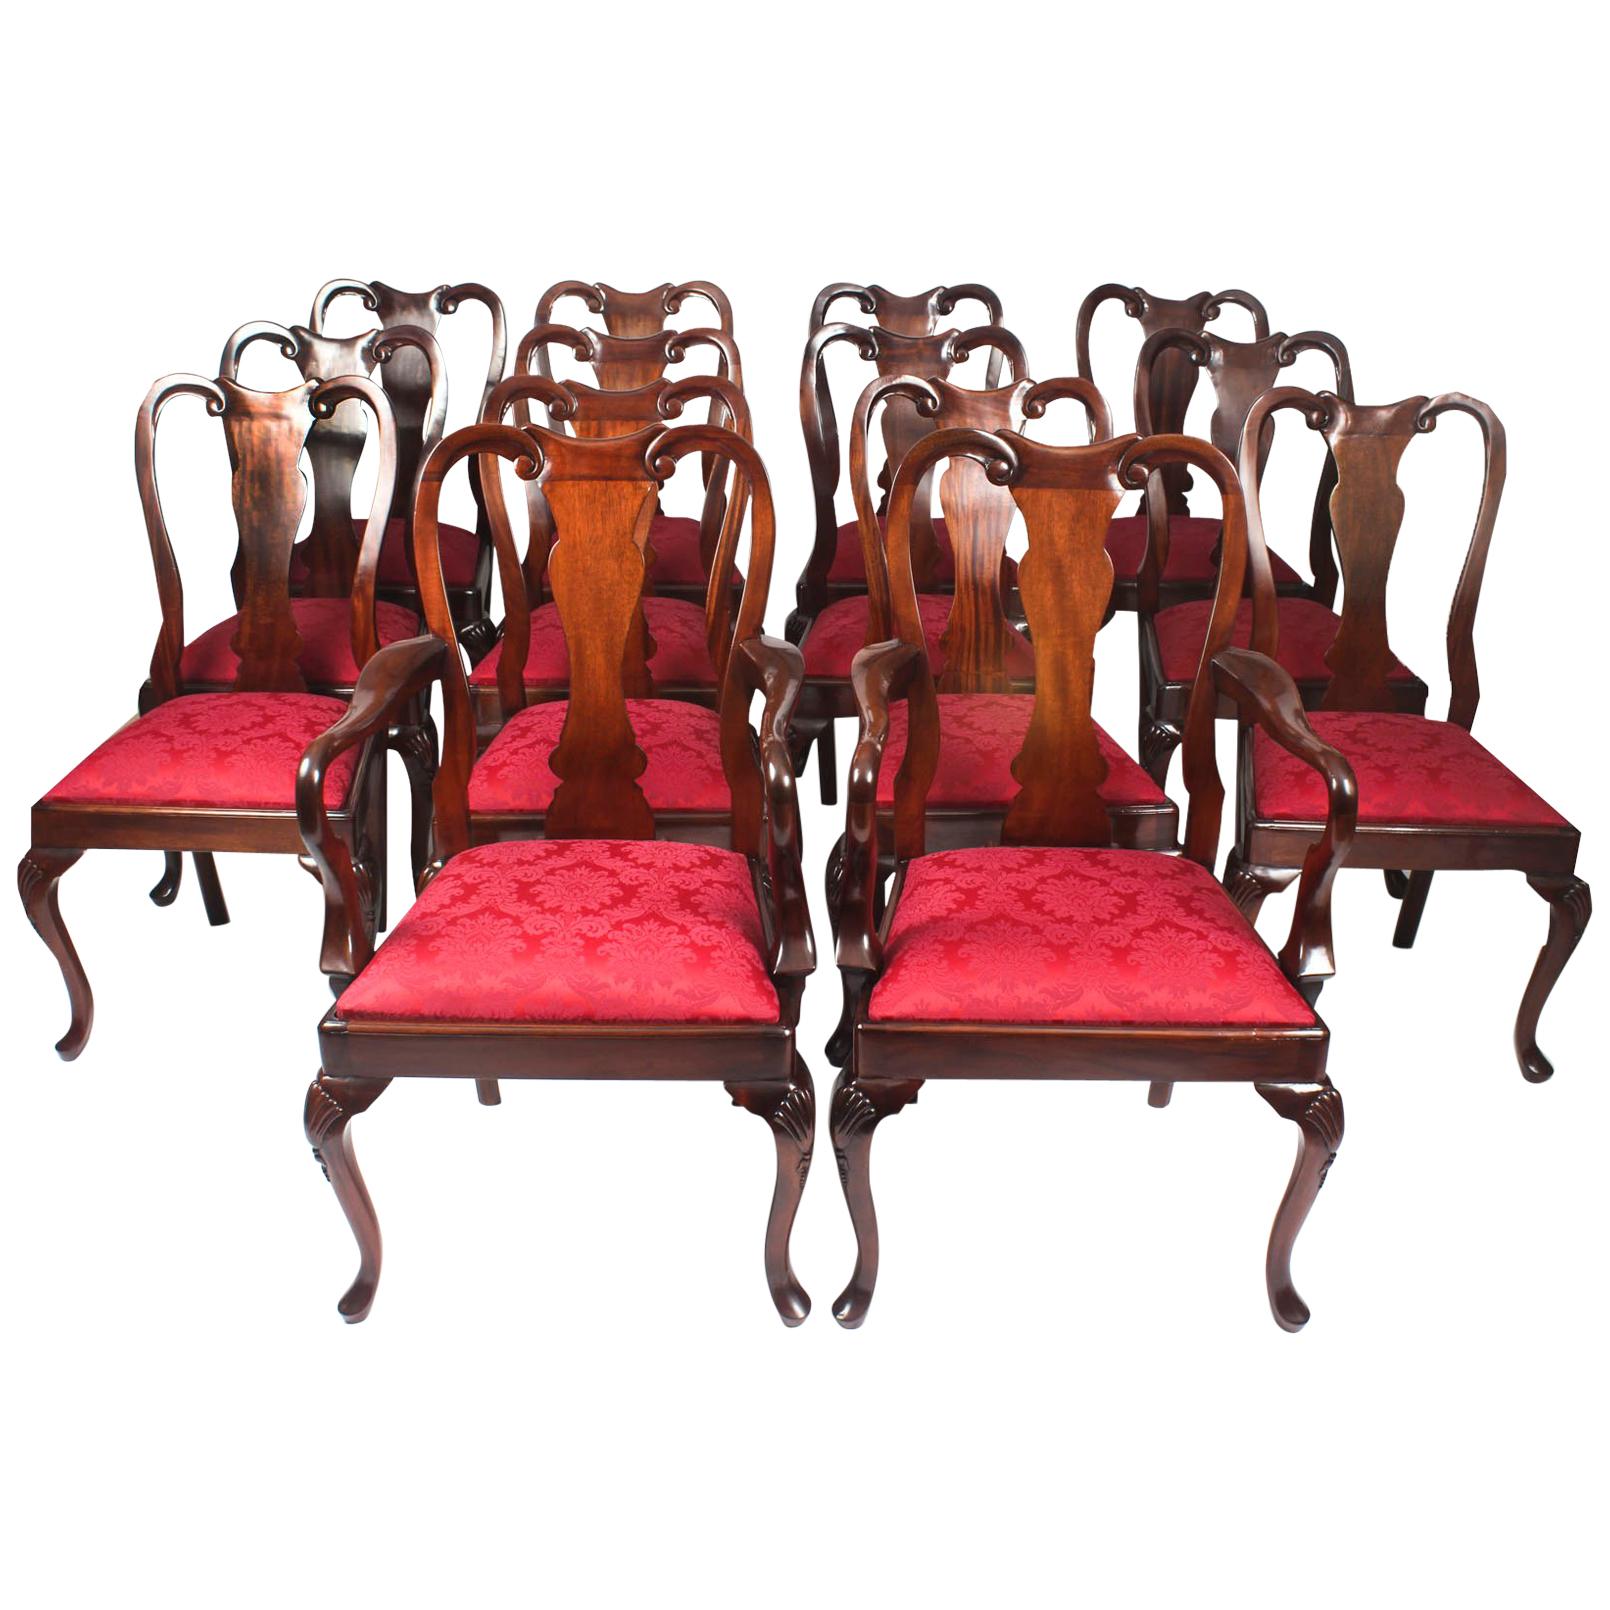 Vintage Set of 14 Queen Anne Style Dining Chairs, Mid-20th Century